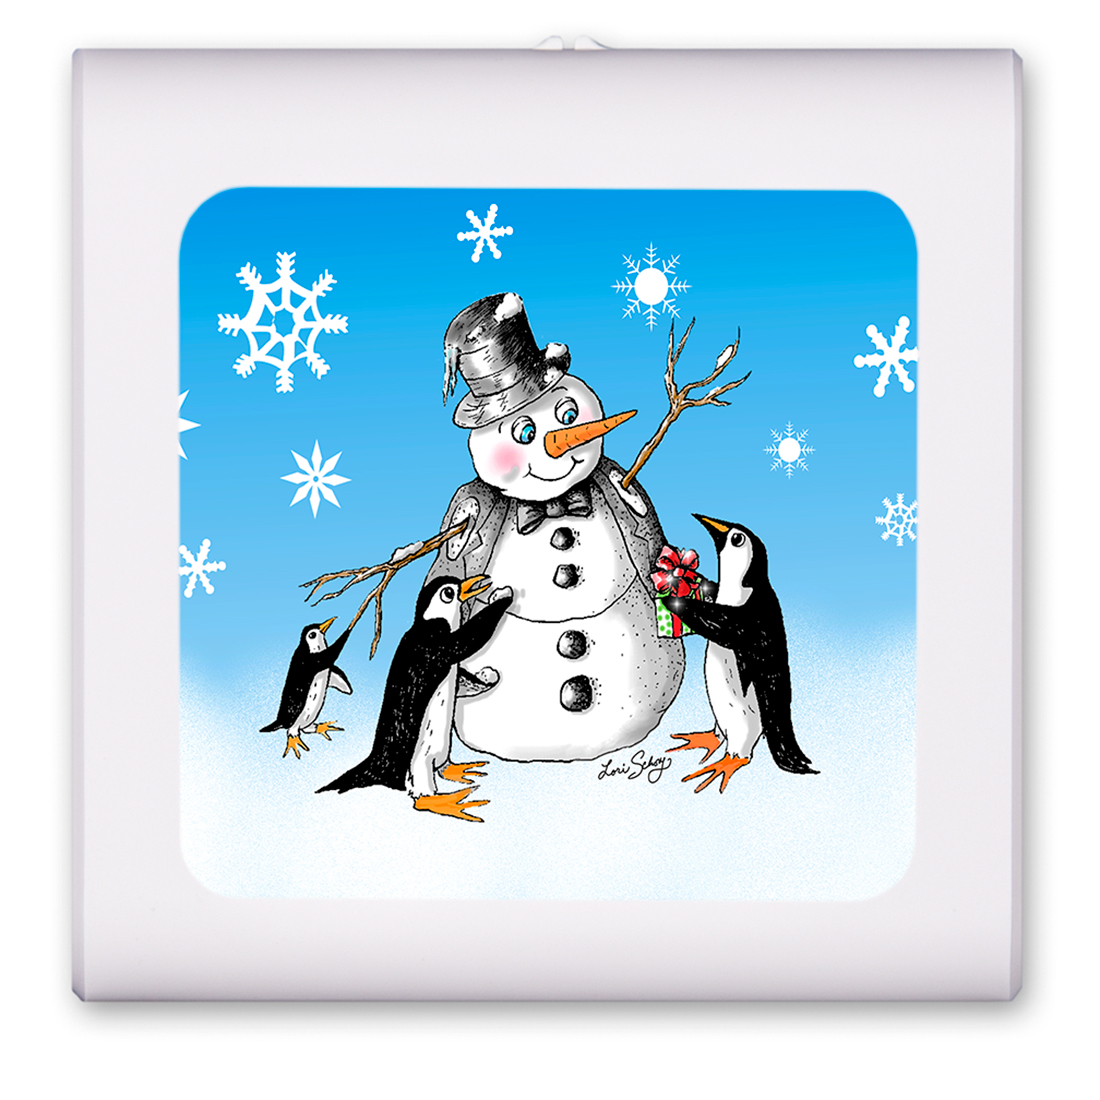 Penguin's and Snowman - #733